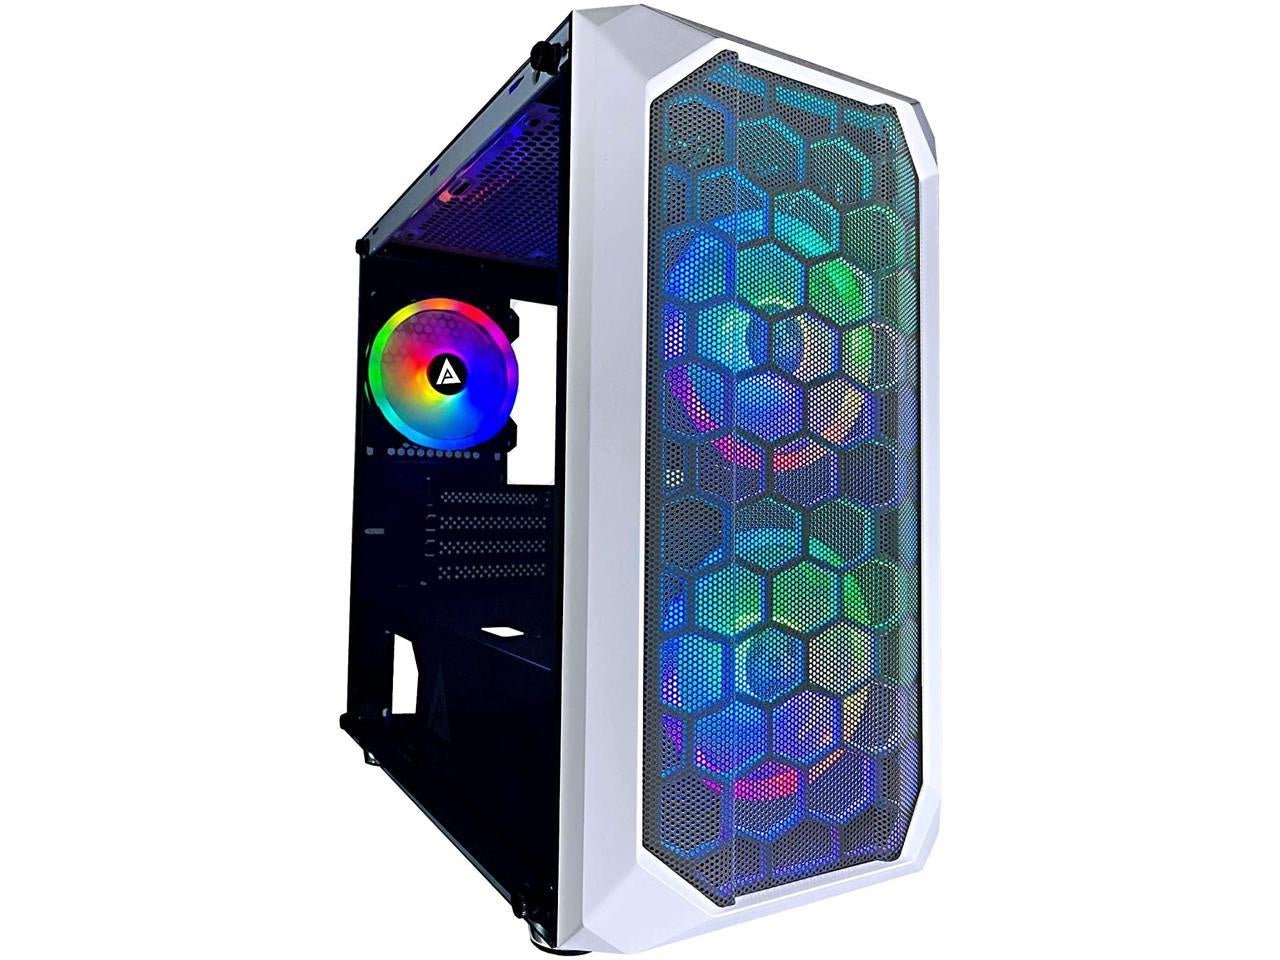 Apevia PRODIGY-WH Micro-ATX Gaming Case with 1 x Tempered Glass Panel, Top USB3.0/USB2.0/Audio Ports, 3 x RGB Fans, White Frame - Geek Tech